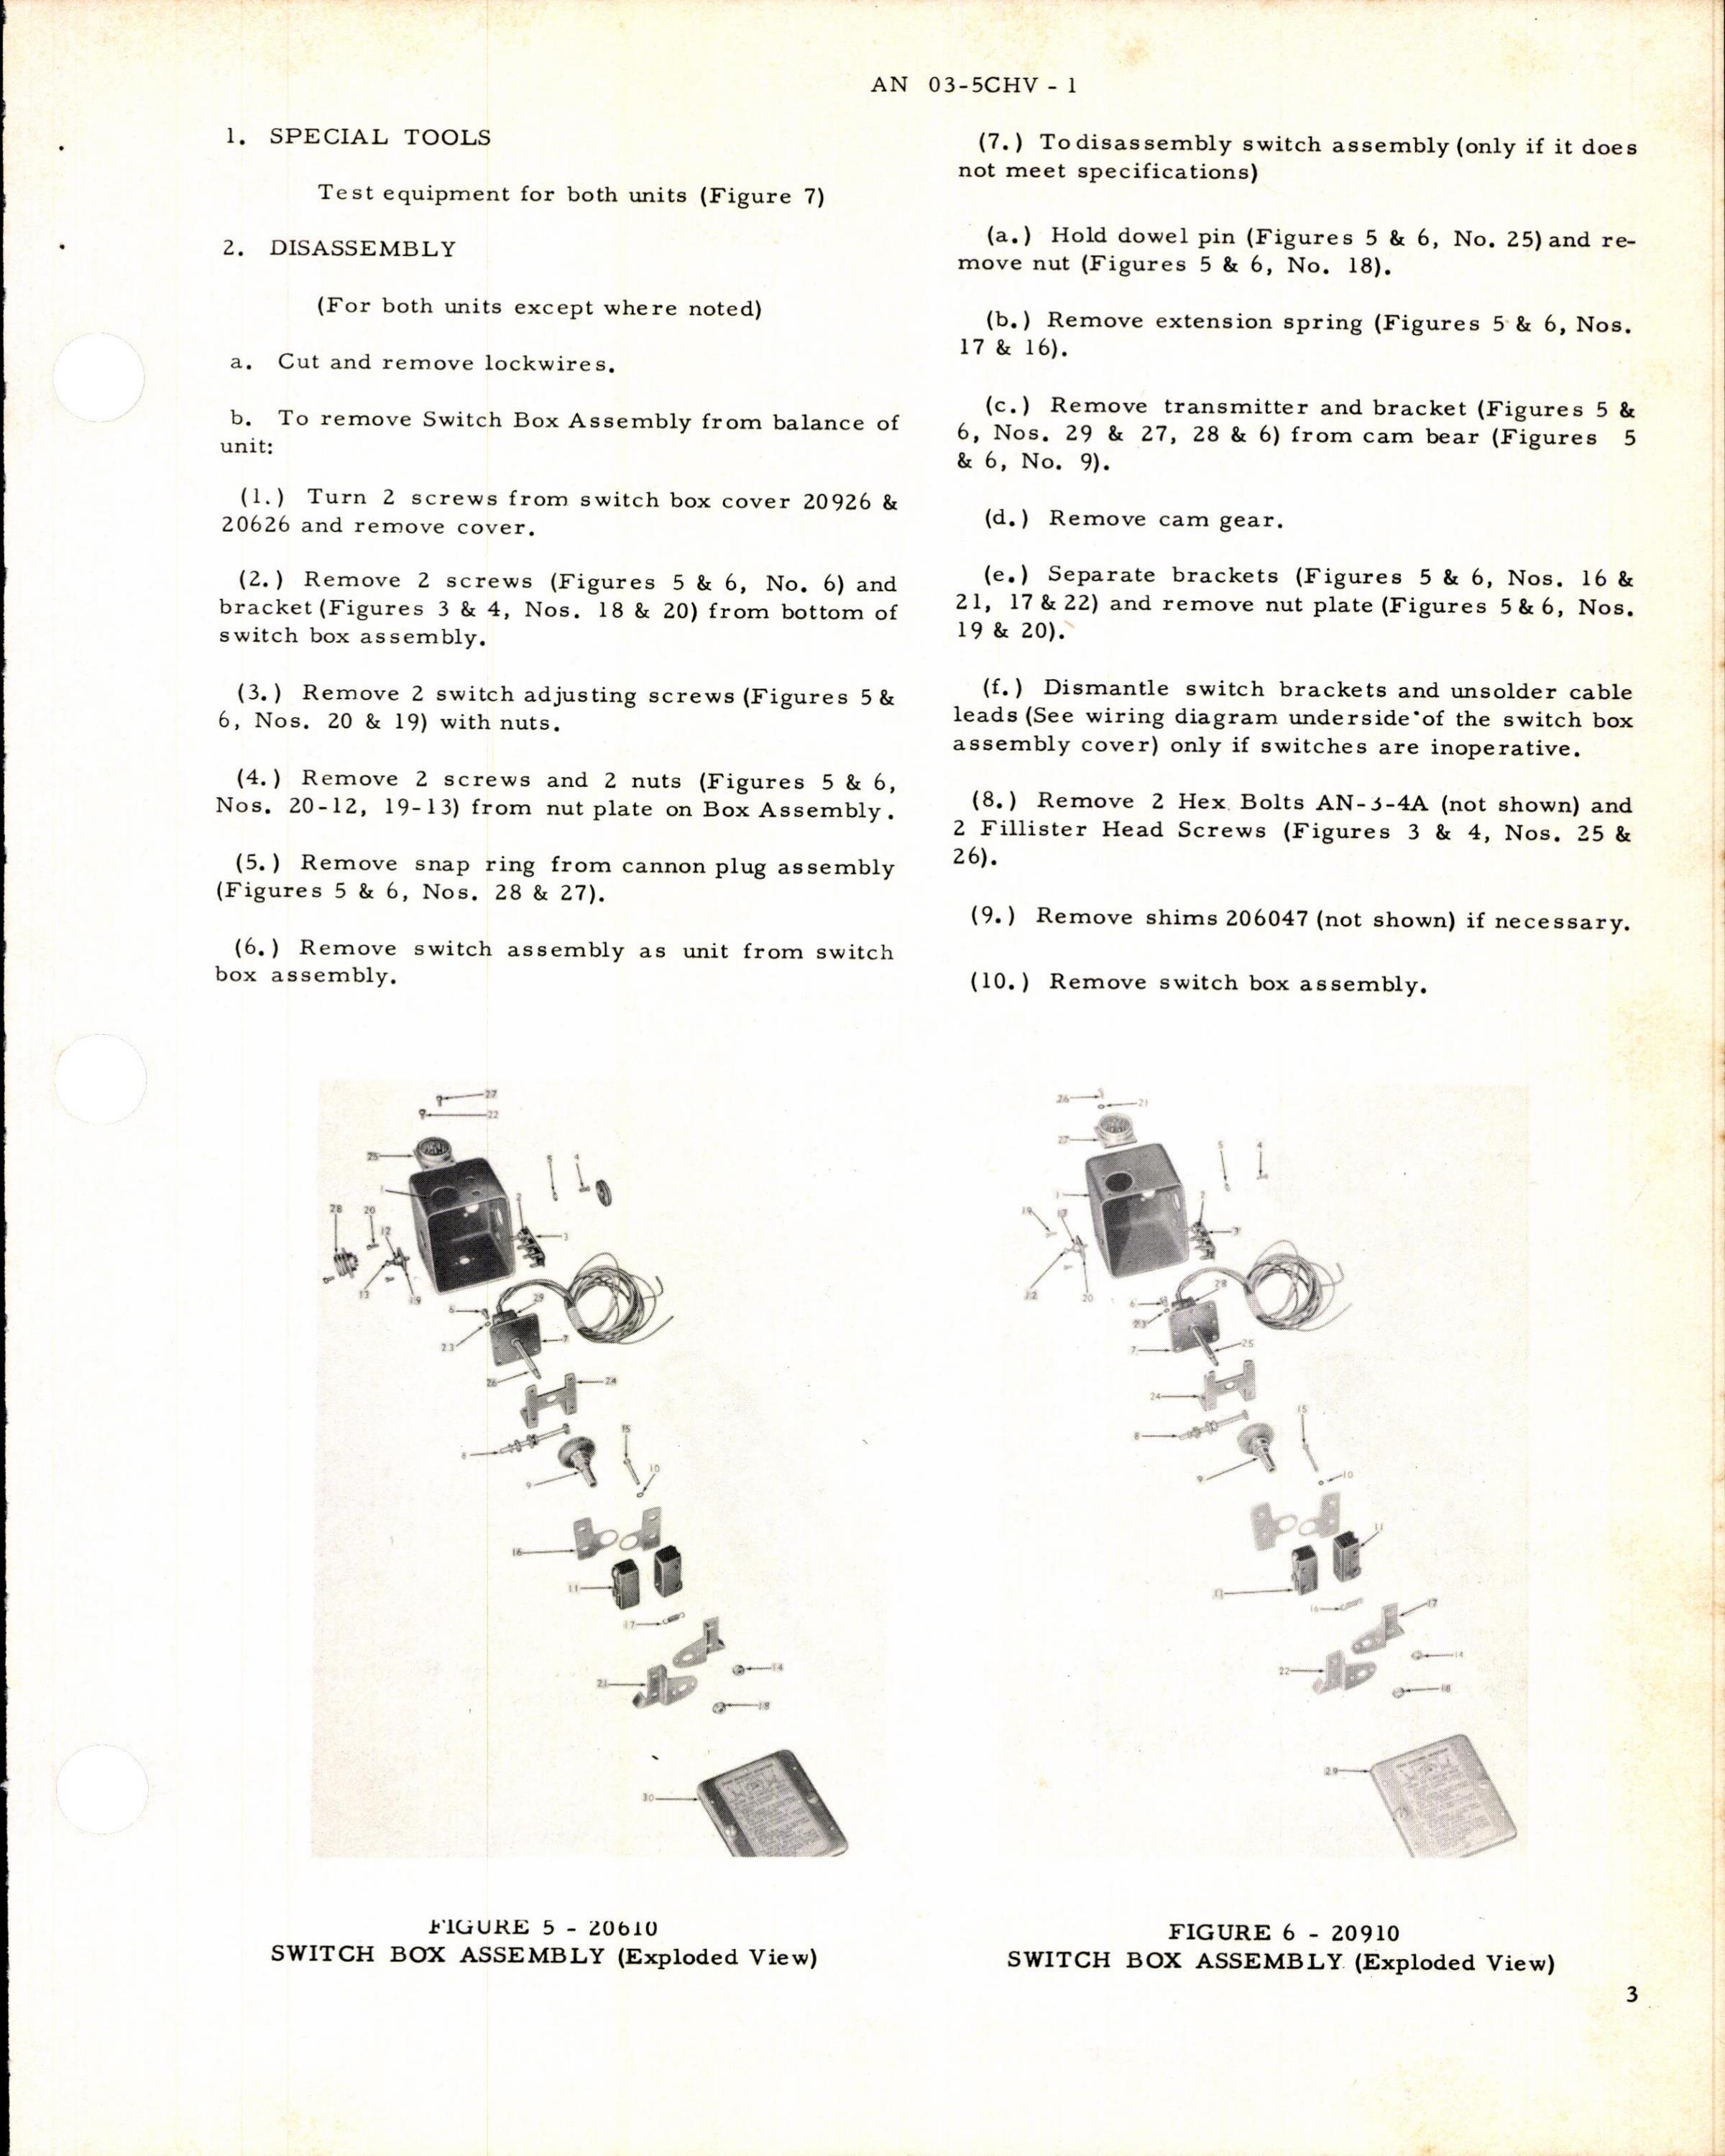 Sample page 3 from AirCorps Library document: Instructions w PB for Cowl Cooler Flap Actuator & Oil Cooler Flap